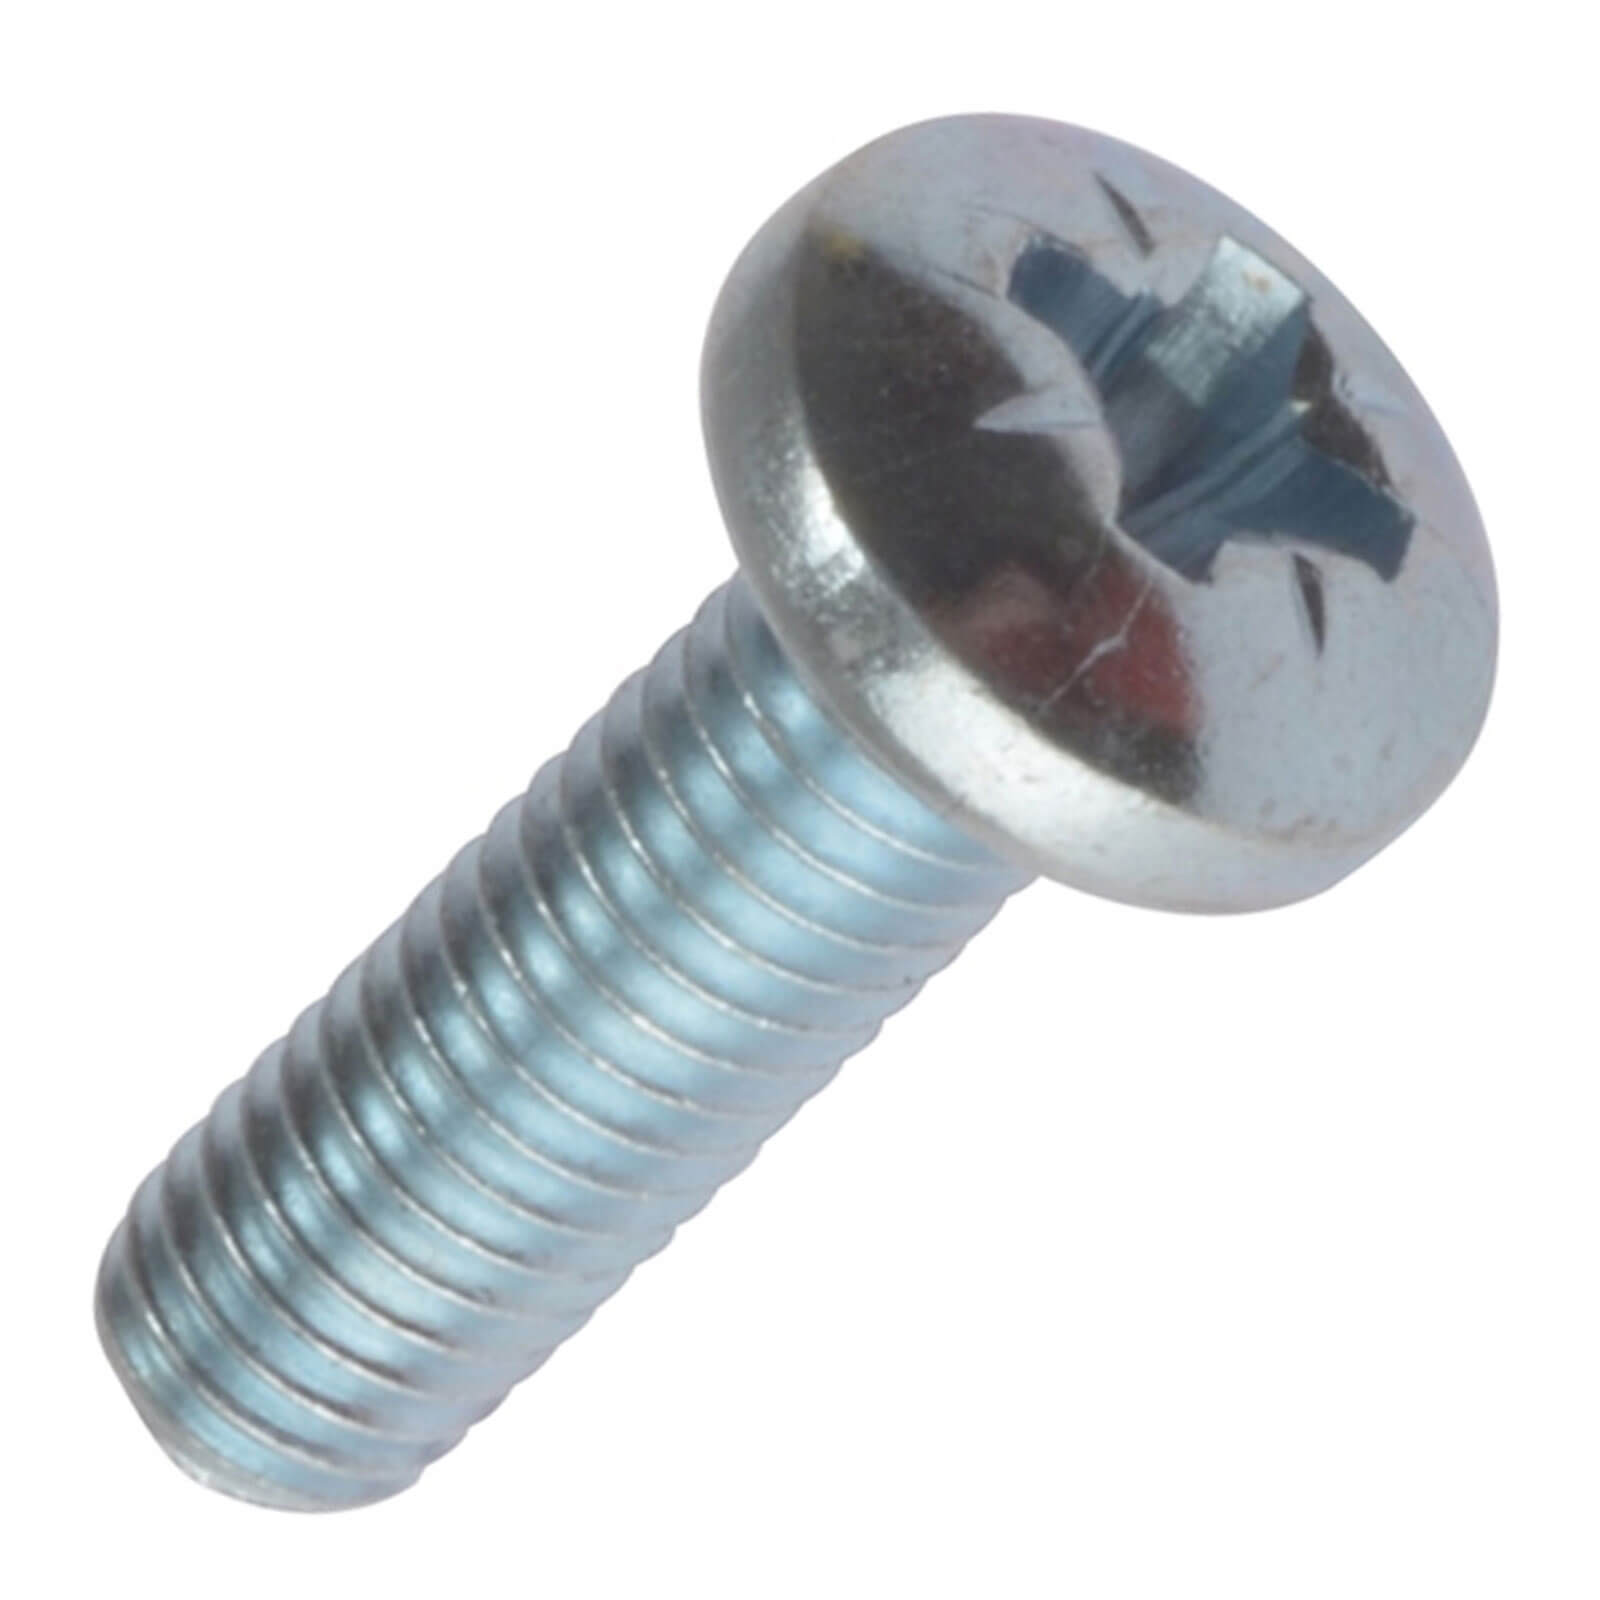 Photos - Nail / Screw / Fastener TIMCO Machine Screw Pozi Pan Head Bright Zinc Plated M5 50mm Pack of 100 5050PPM 